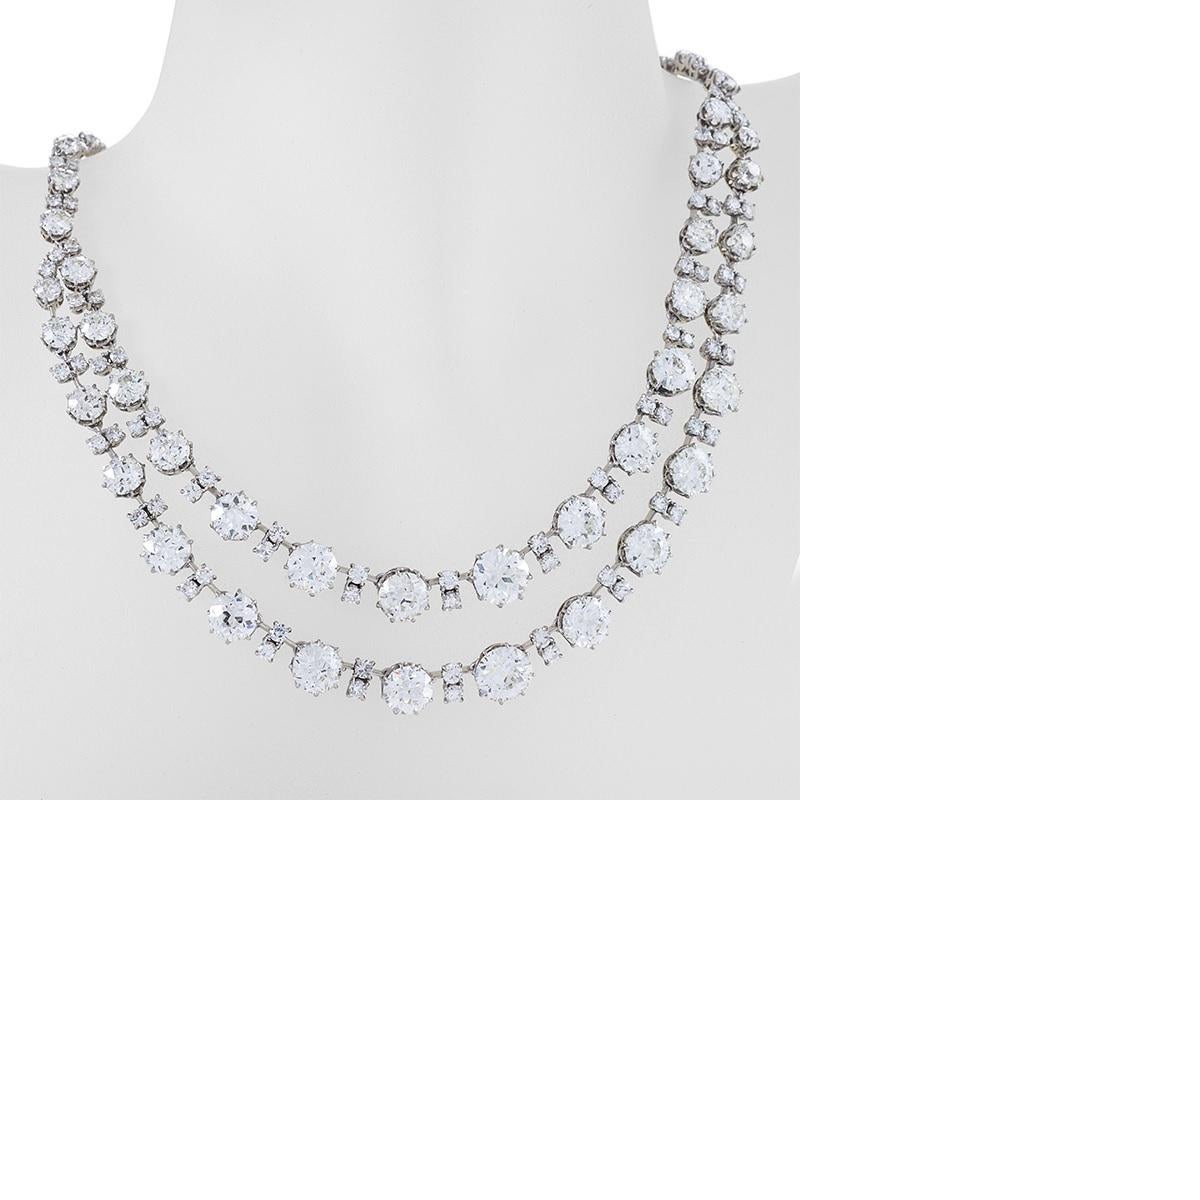 A French Belle Epoque platinum-topped gold necklace with diamonds by Chaumet. The necklace has old European-cut diamonds with an approximate total weight of 68 carats, H-I-J color, VS/SI clarity. The necklace is designed as a graduated double